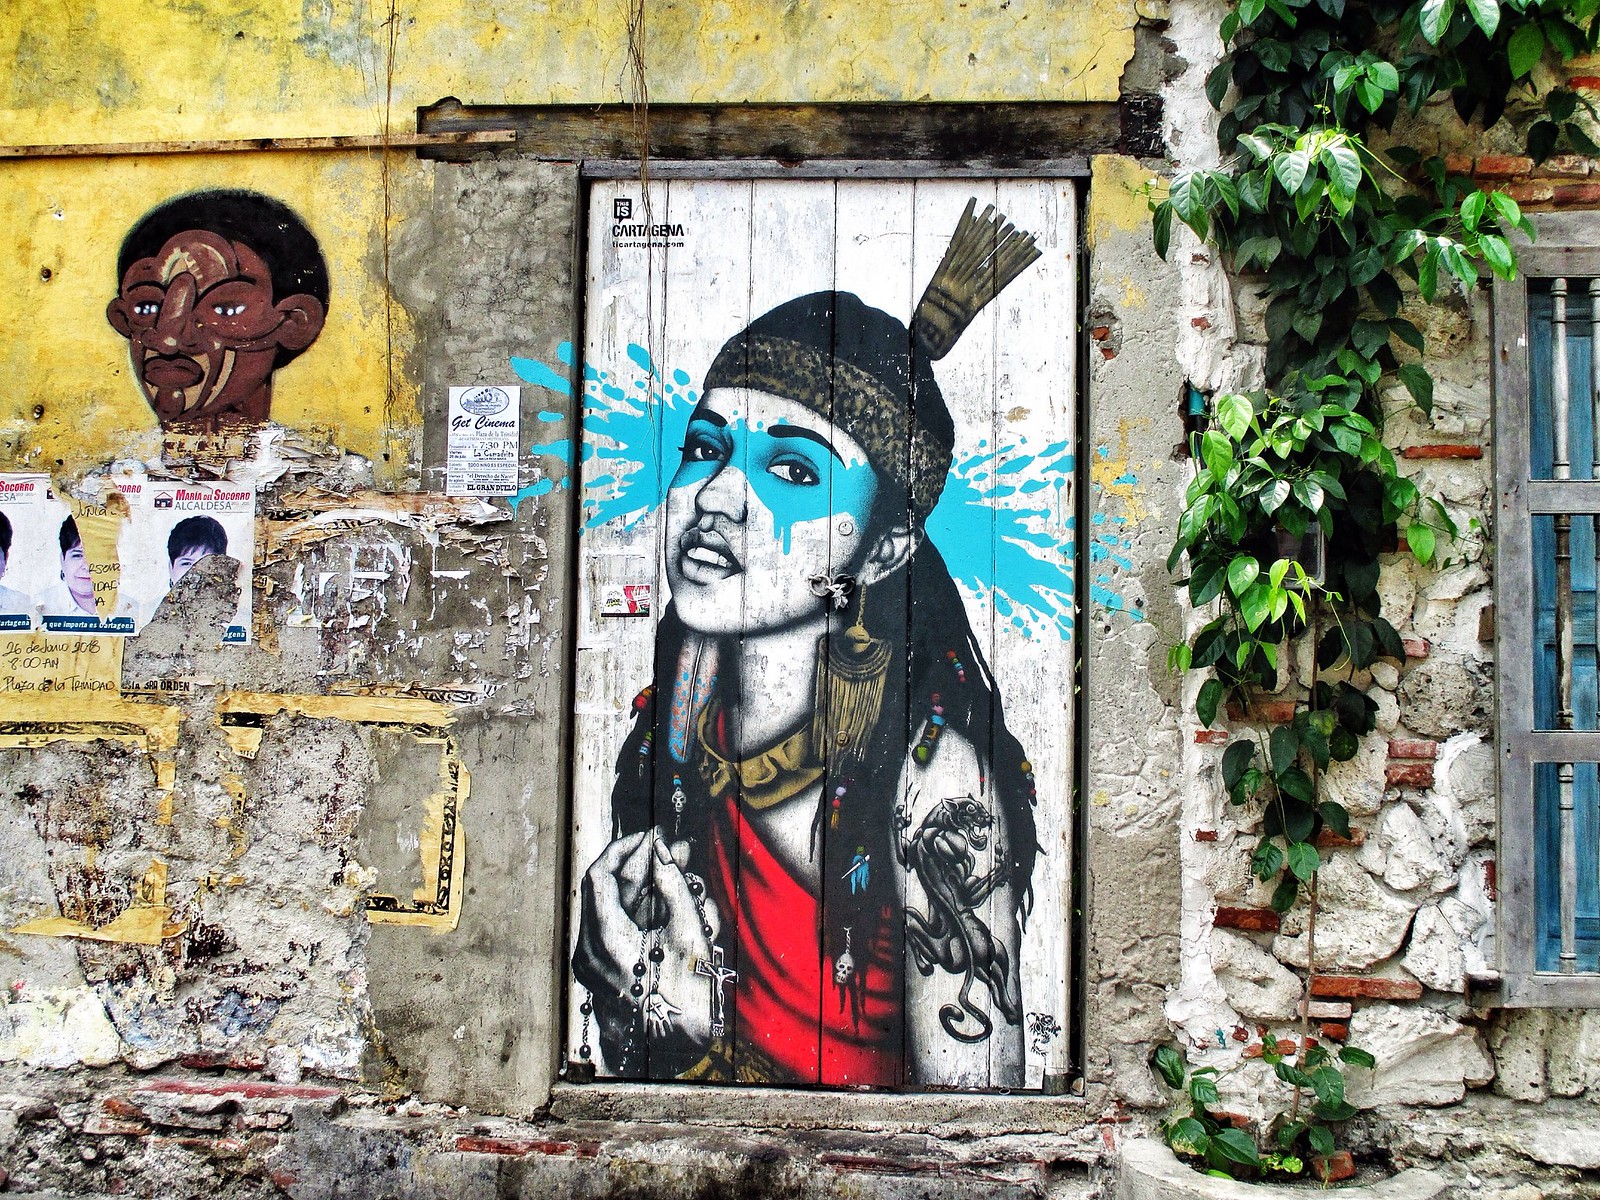 Young Indian boy graffiti by Fin DAC in Cartagena, Colombia